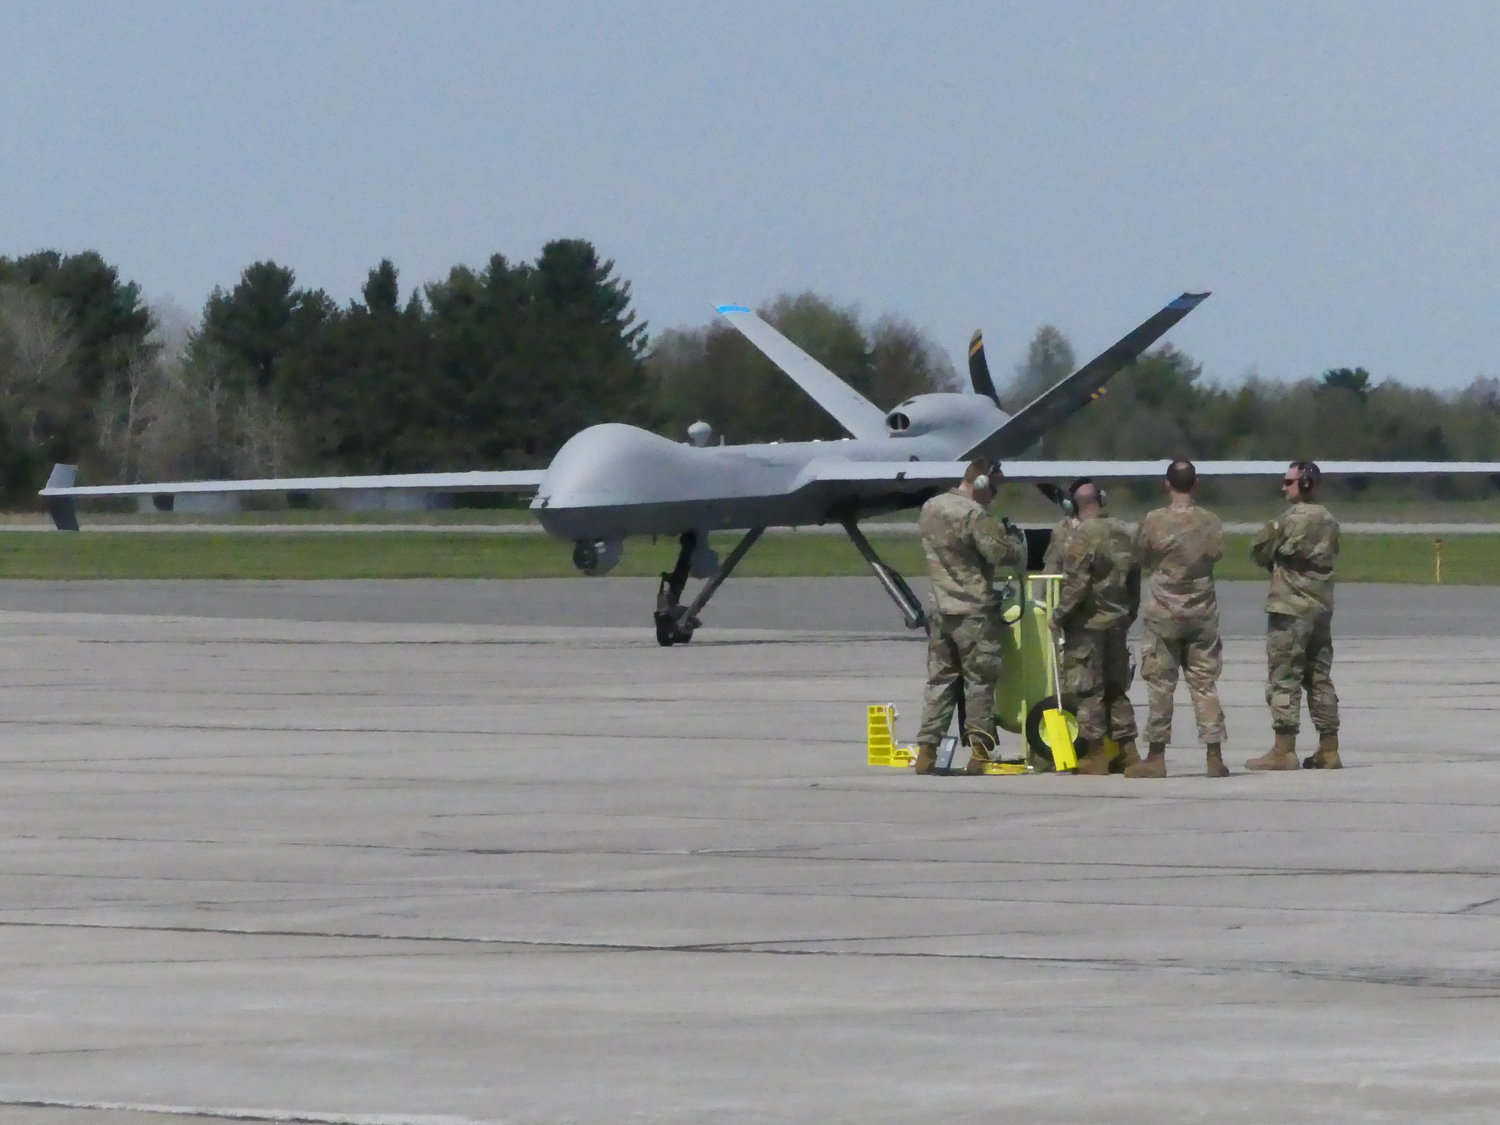 A New York Air National Guard 174th Attack Wing ground crew sees to the successful landing of an MQ-9 Reaper remotely piloted aircraft, which took off from Hancock Field Air National Guard Base in Syracuse and landed at Griffiss International Airport in Rome Thursday, May 5.  It was the first time the aircraft landed on a runway other than its home base. With new software and technology, the MQ-9 can now remain airborne for about 24 hours.